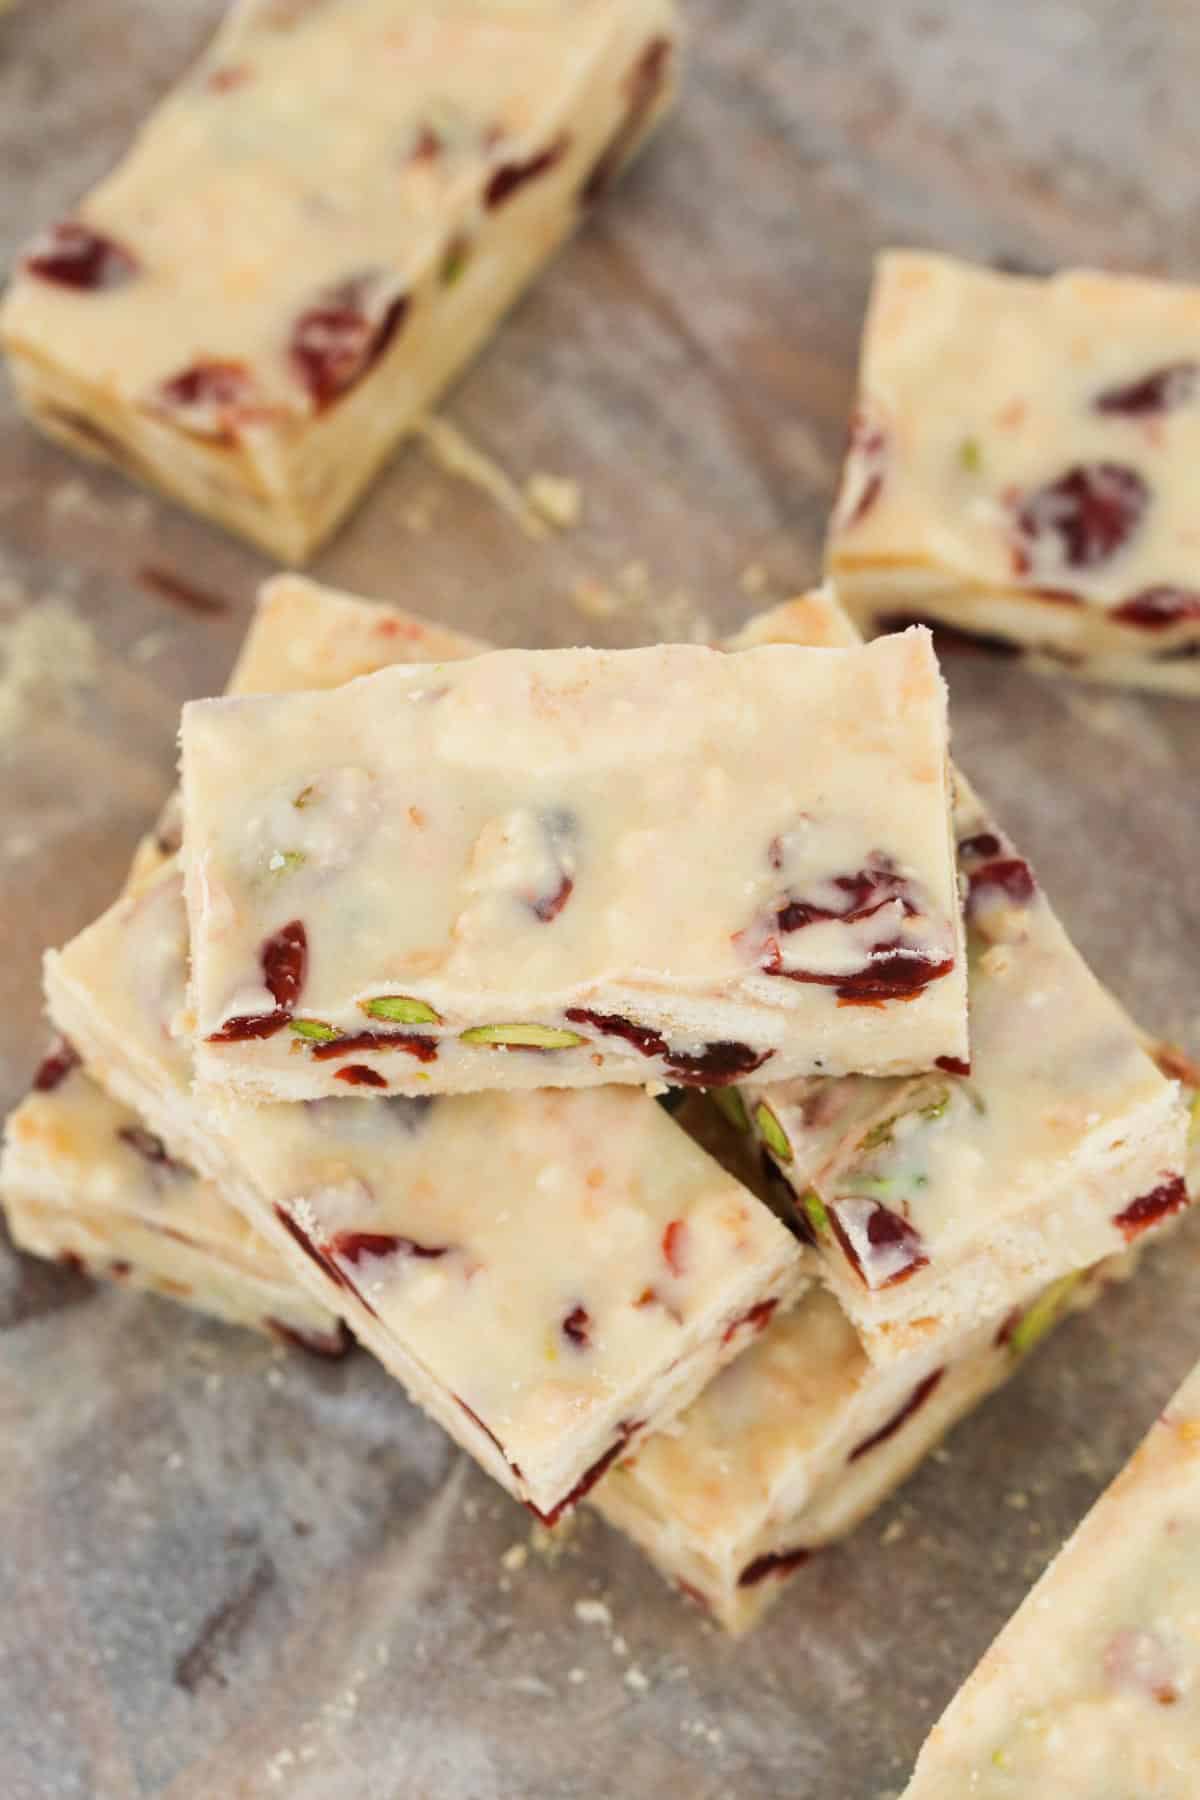 A pile of rectangles of pistachio and cranberry slice.